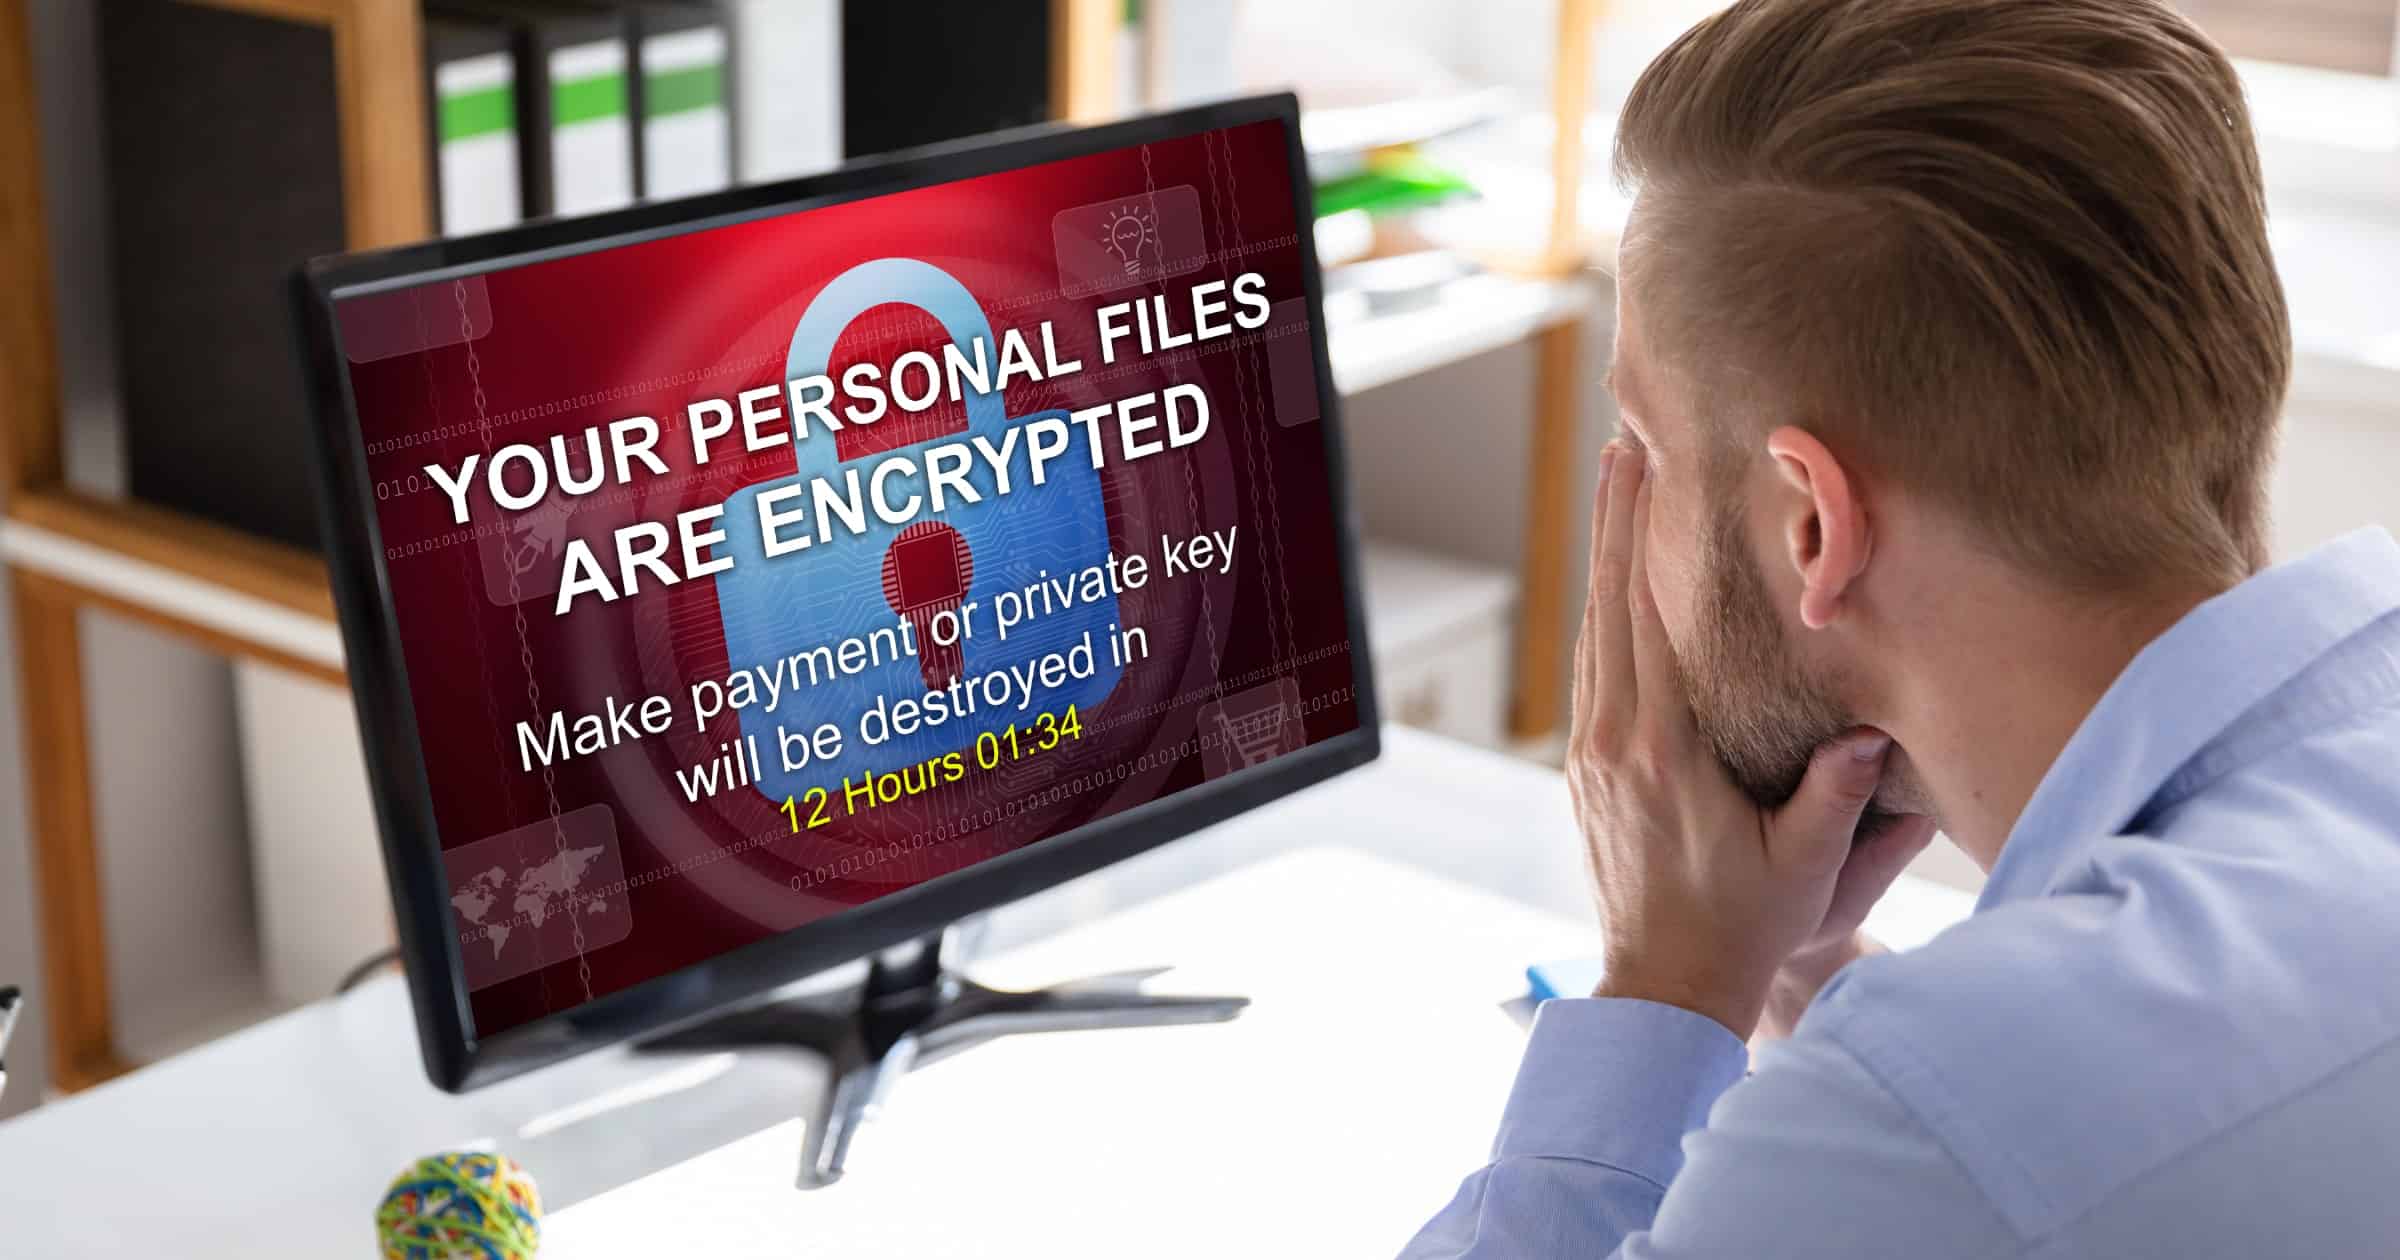 Cuba Ransomware Gang Made $43.9 Million in Ransom Payments